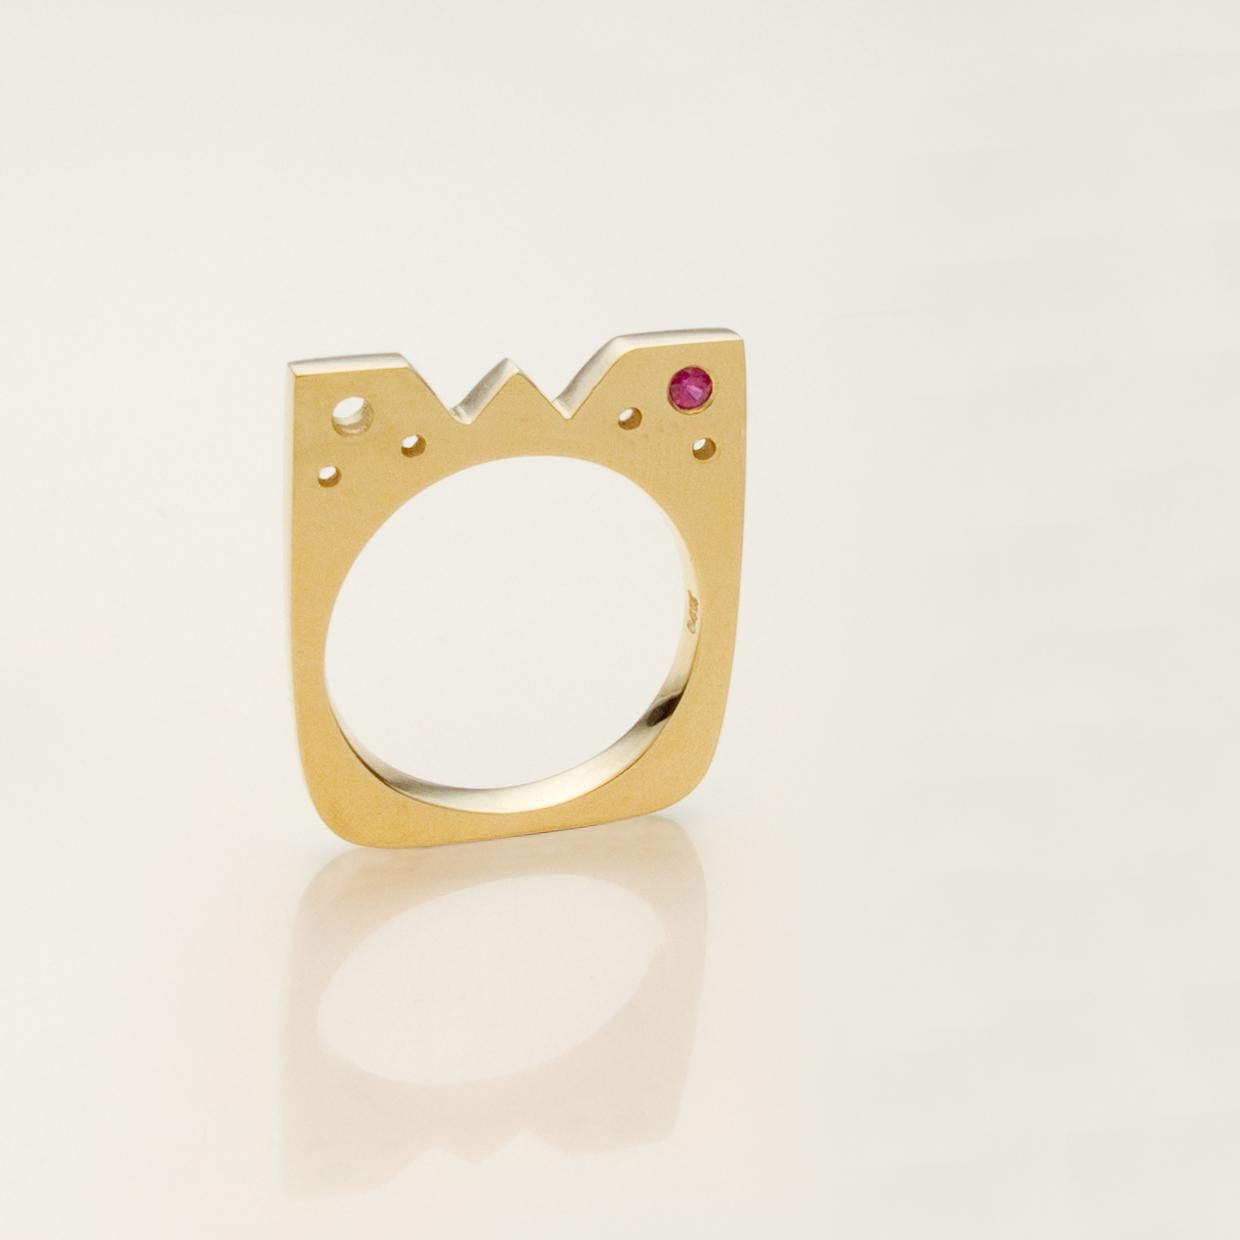 Contemporary Susan Crow Studio Square Flat Ring in Yellow Gold with Dark Pink Sapphire For Sale